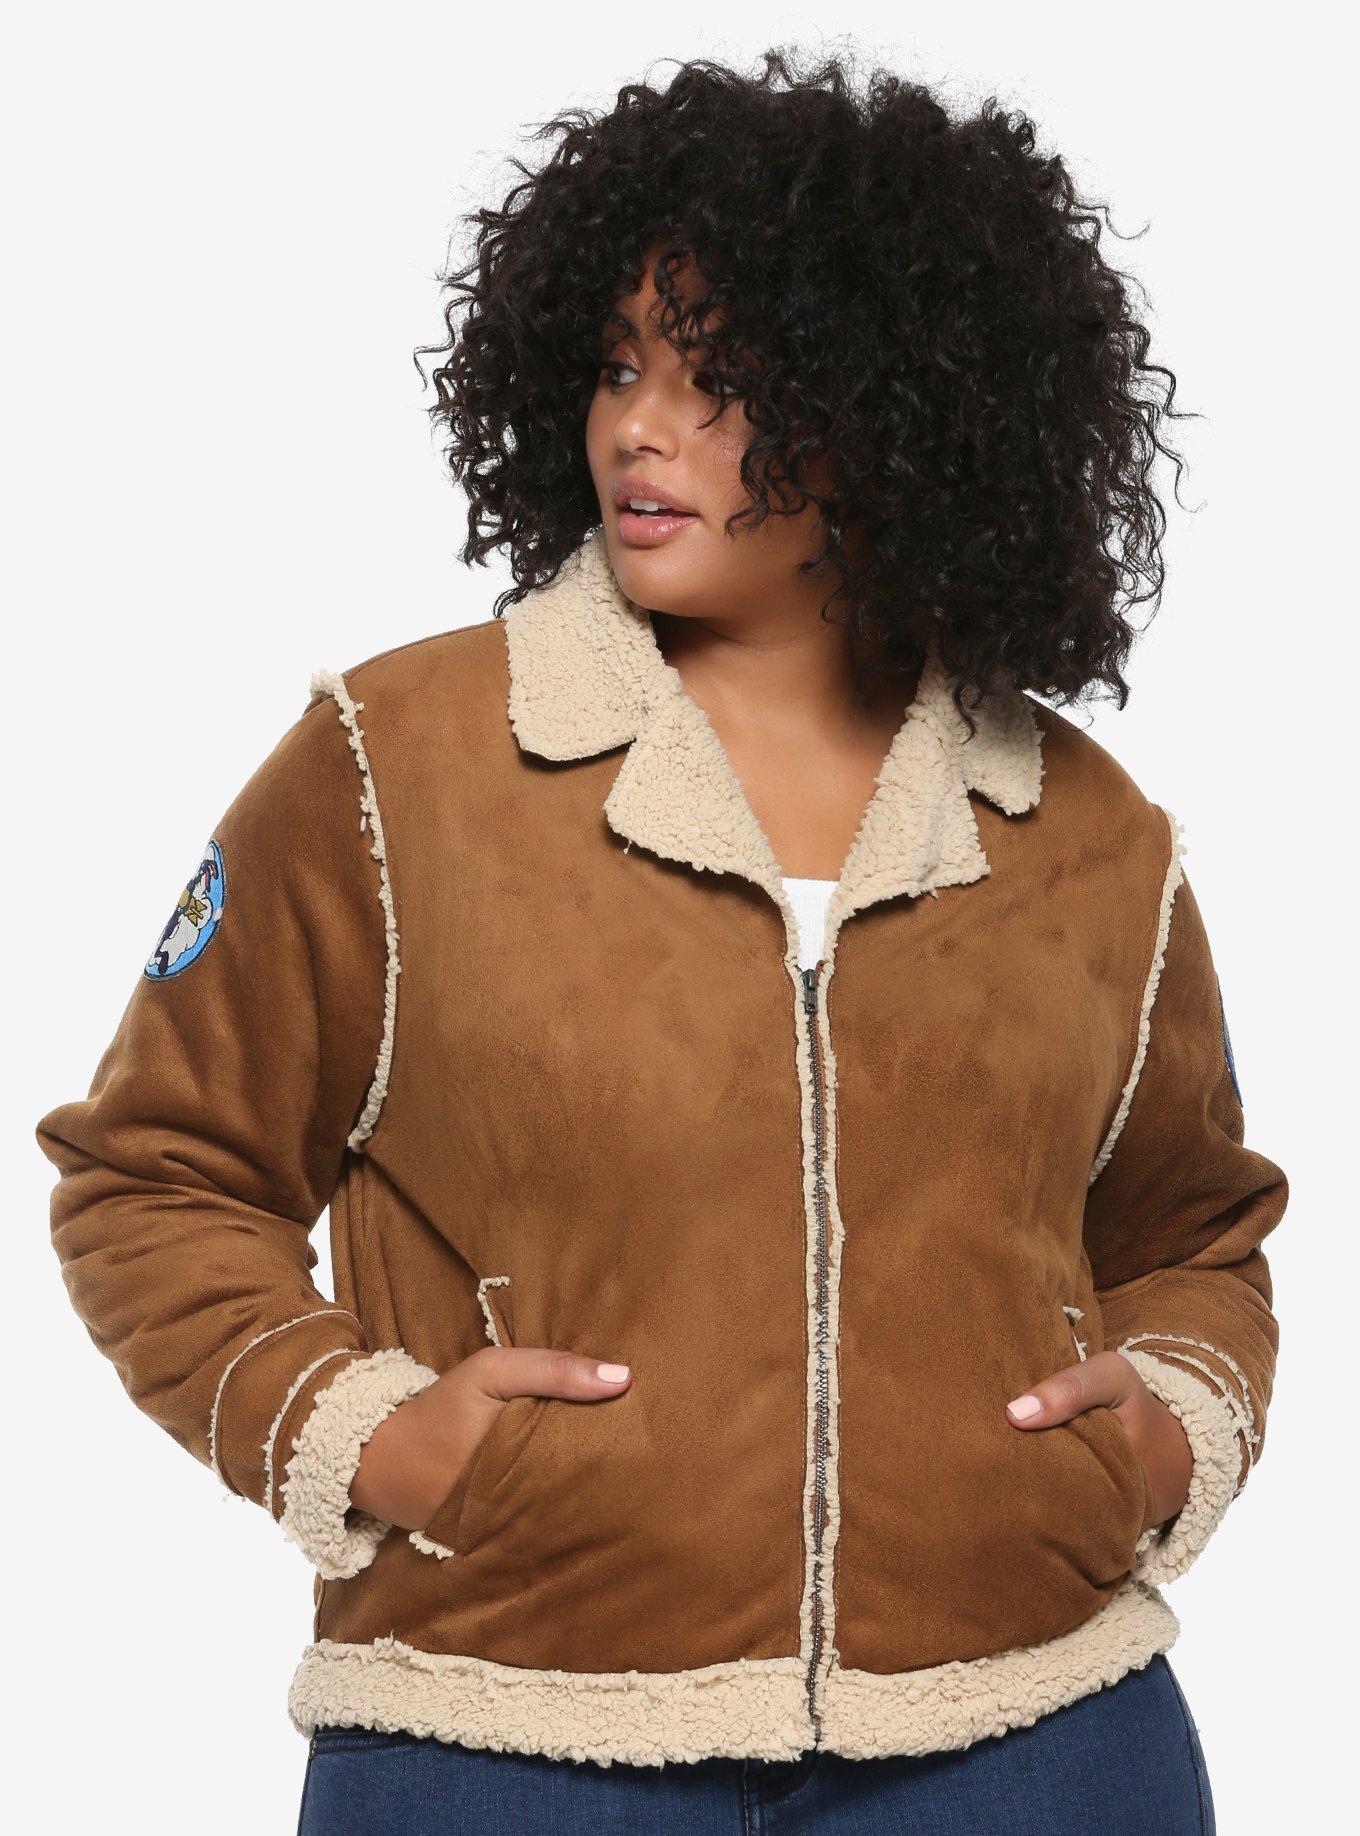 Her Universe Tomb Raider Shadow Of The Tomb Raider Girls Aviator Cosplay Jacket Plus Size, TAN/BEIGE, hi-res